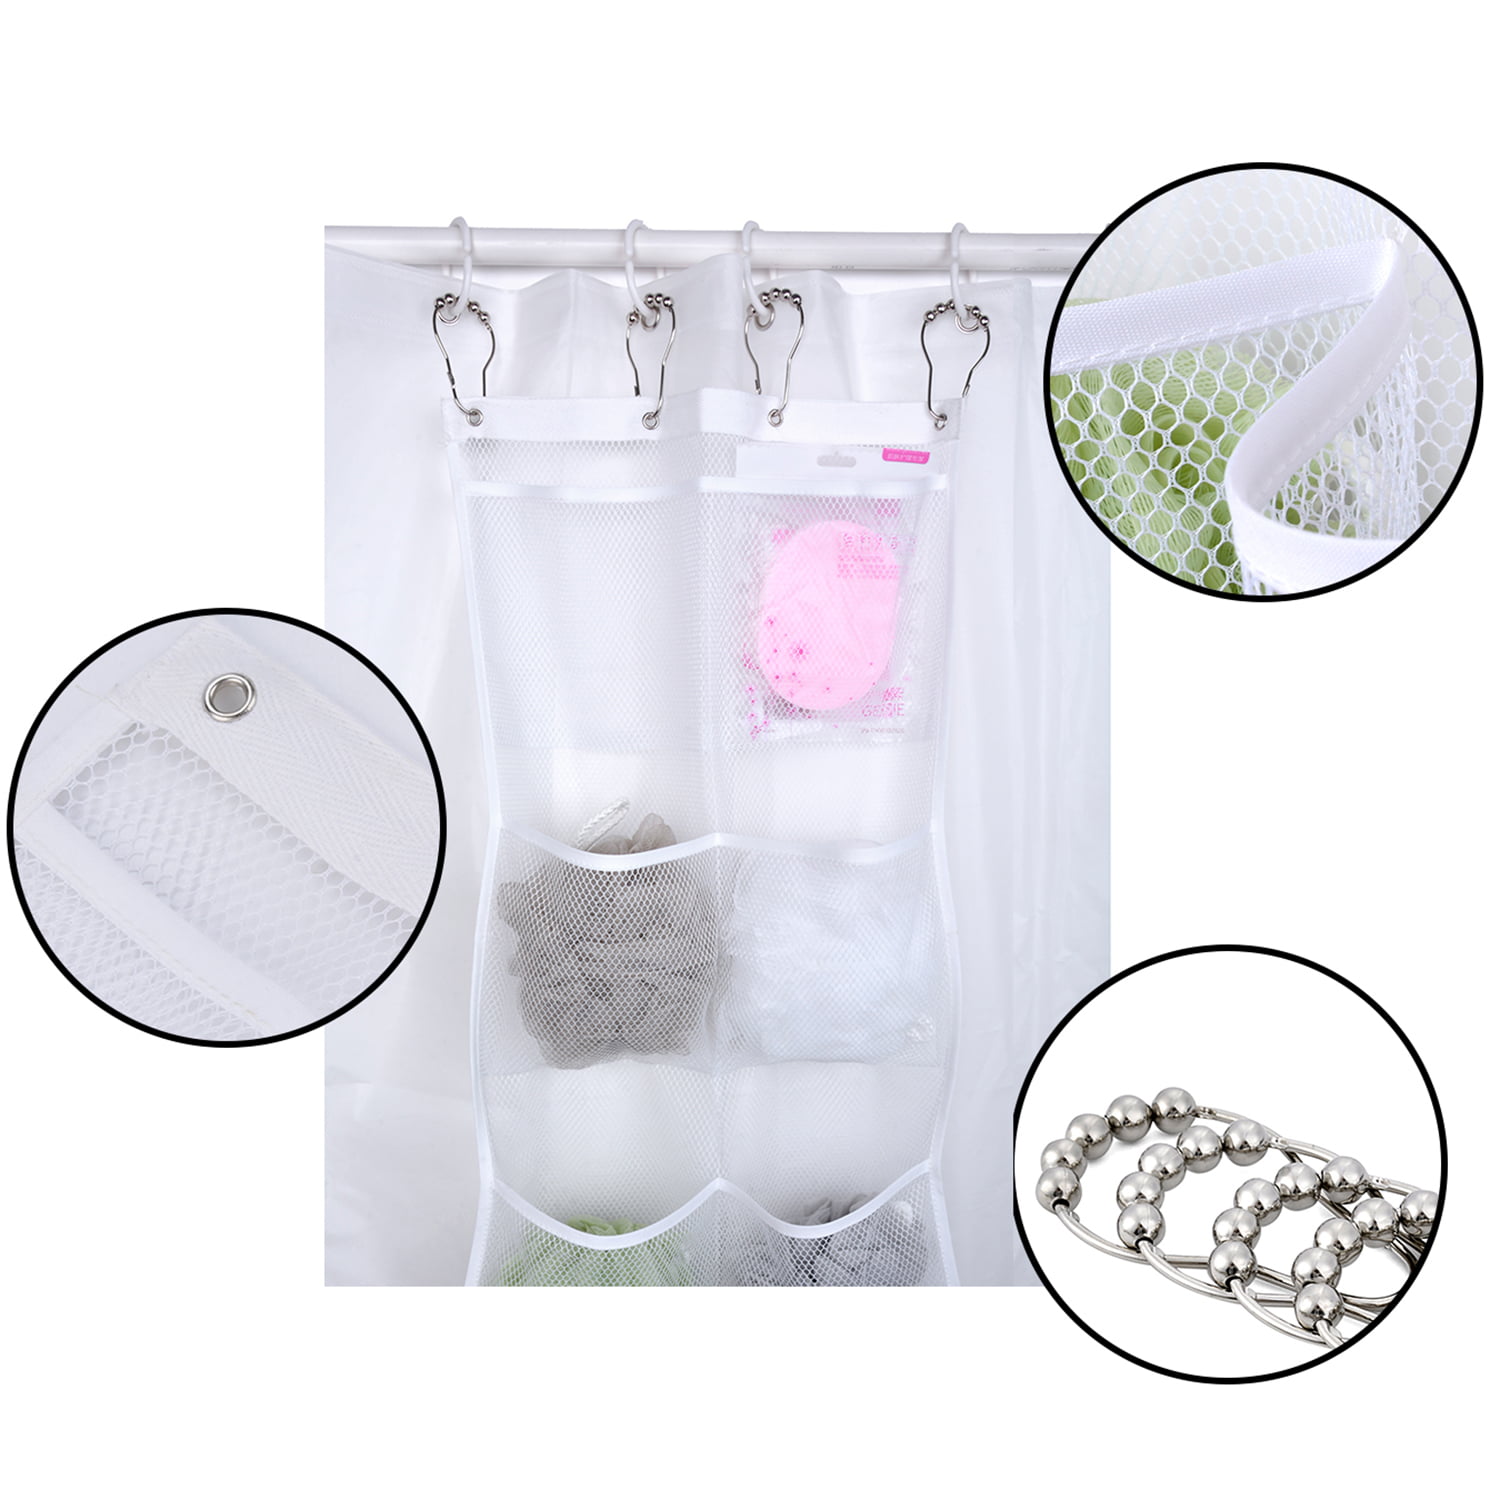 Yihoon Mesh Shower Caddy Curtains Organizer - Hanging Bathroom Shower  Curtain Rod/Liner Hooks Accessories with 6 Pockets Save Space in Small  Bathroom